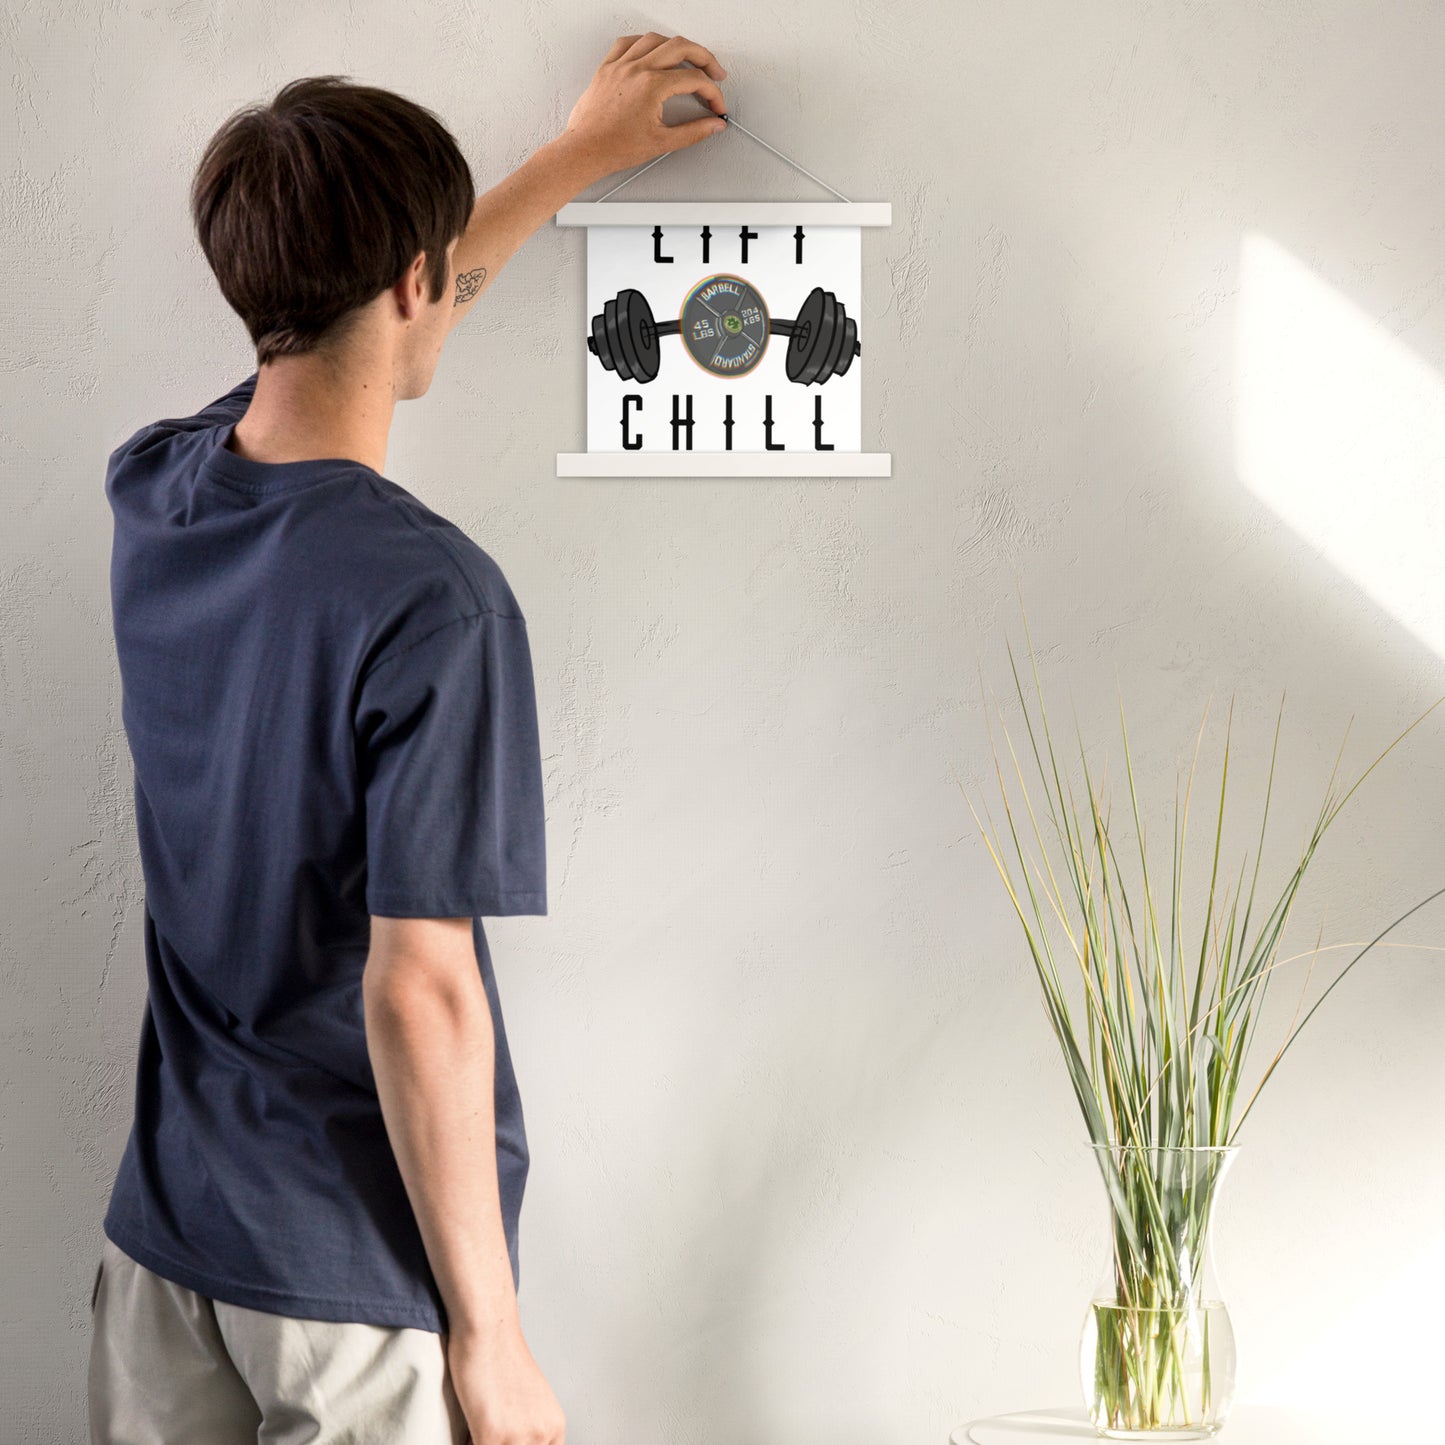 Lift n' Chill Poster with hangers